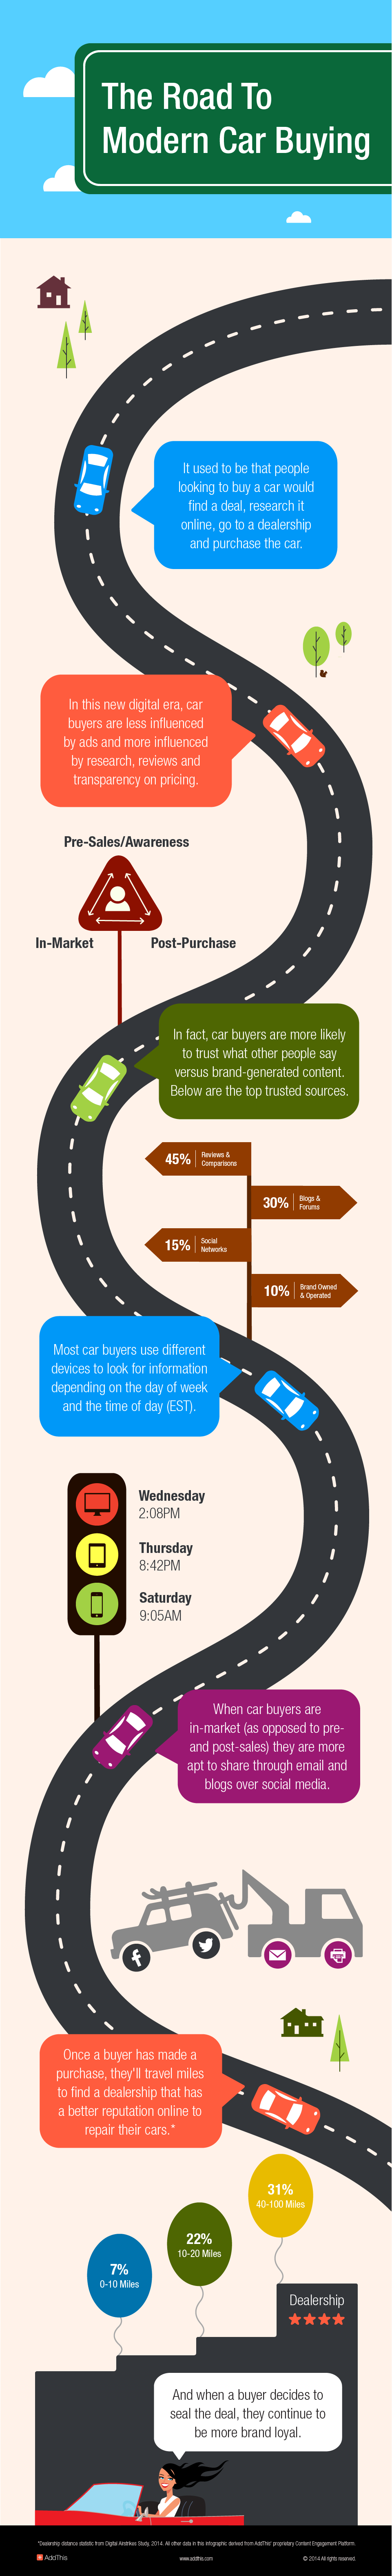 addthis-auto-infographic-car-buying-2014